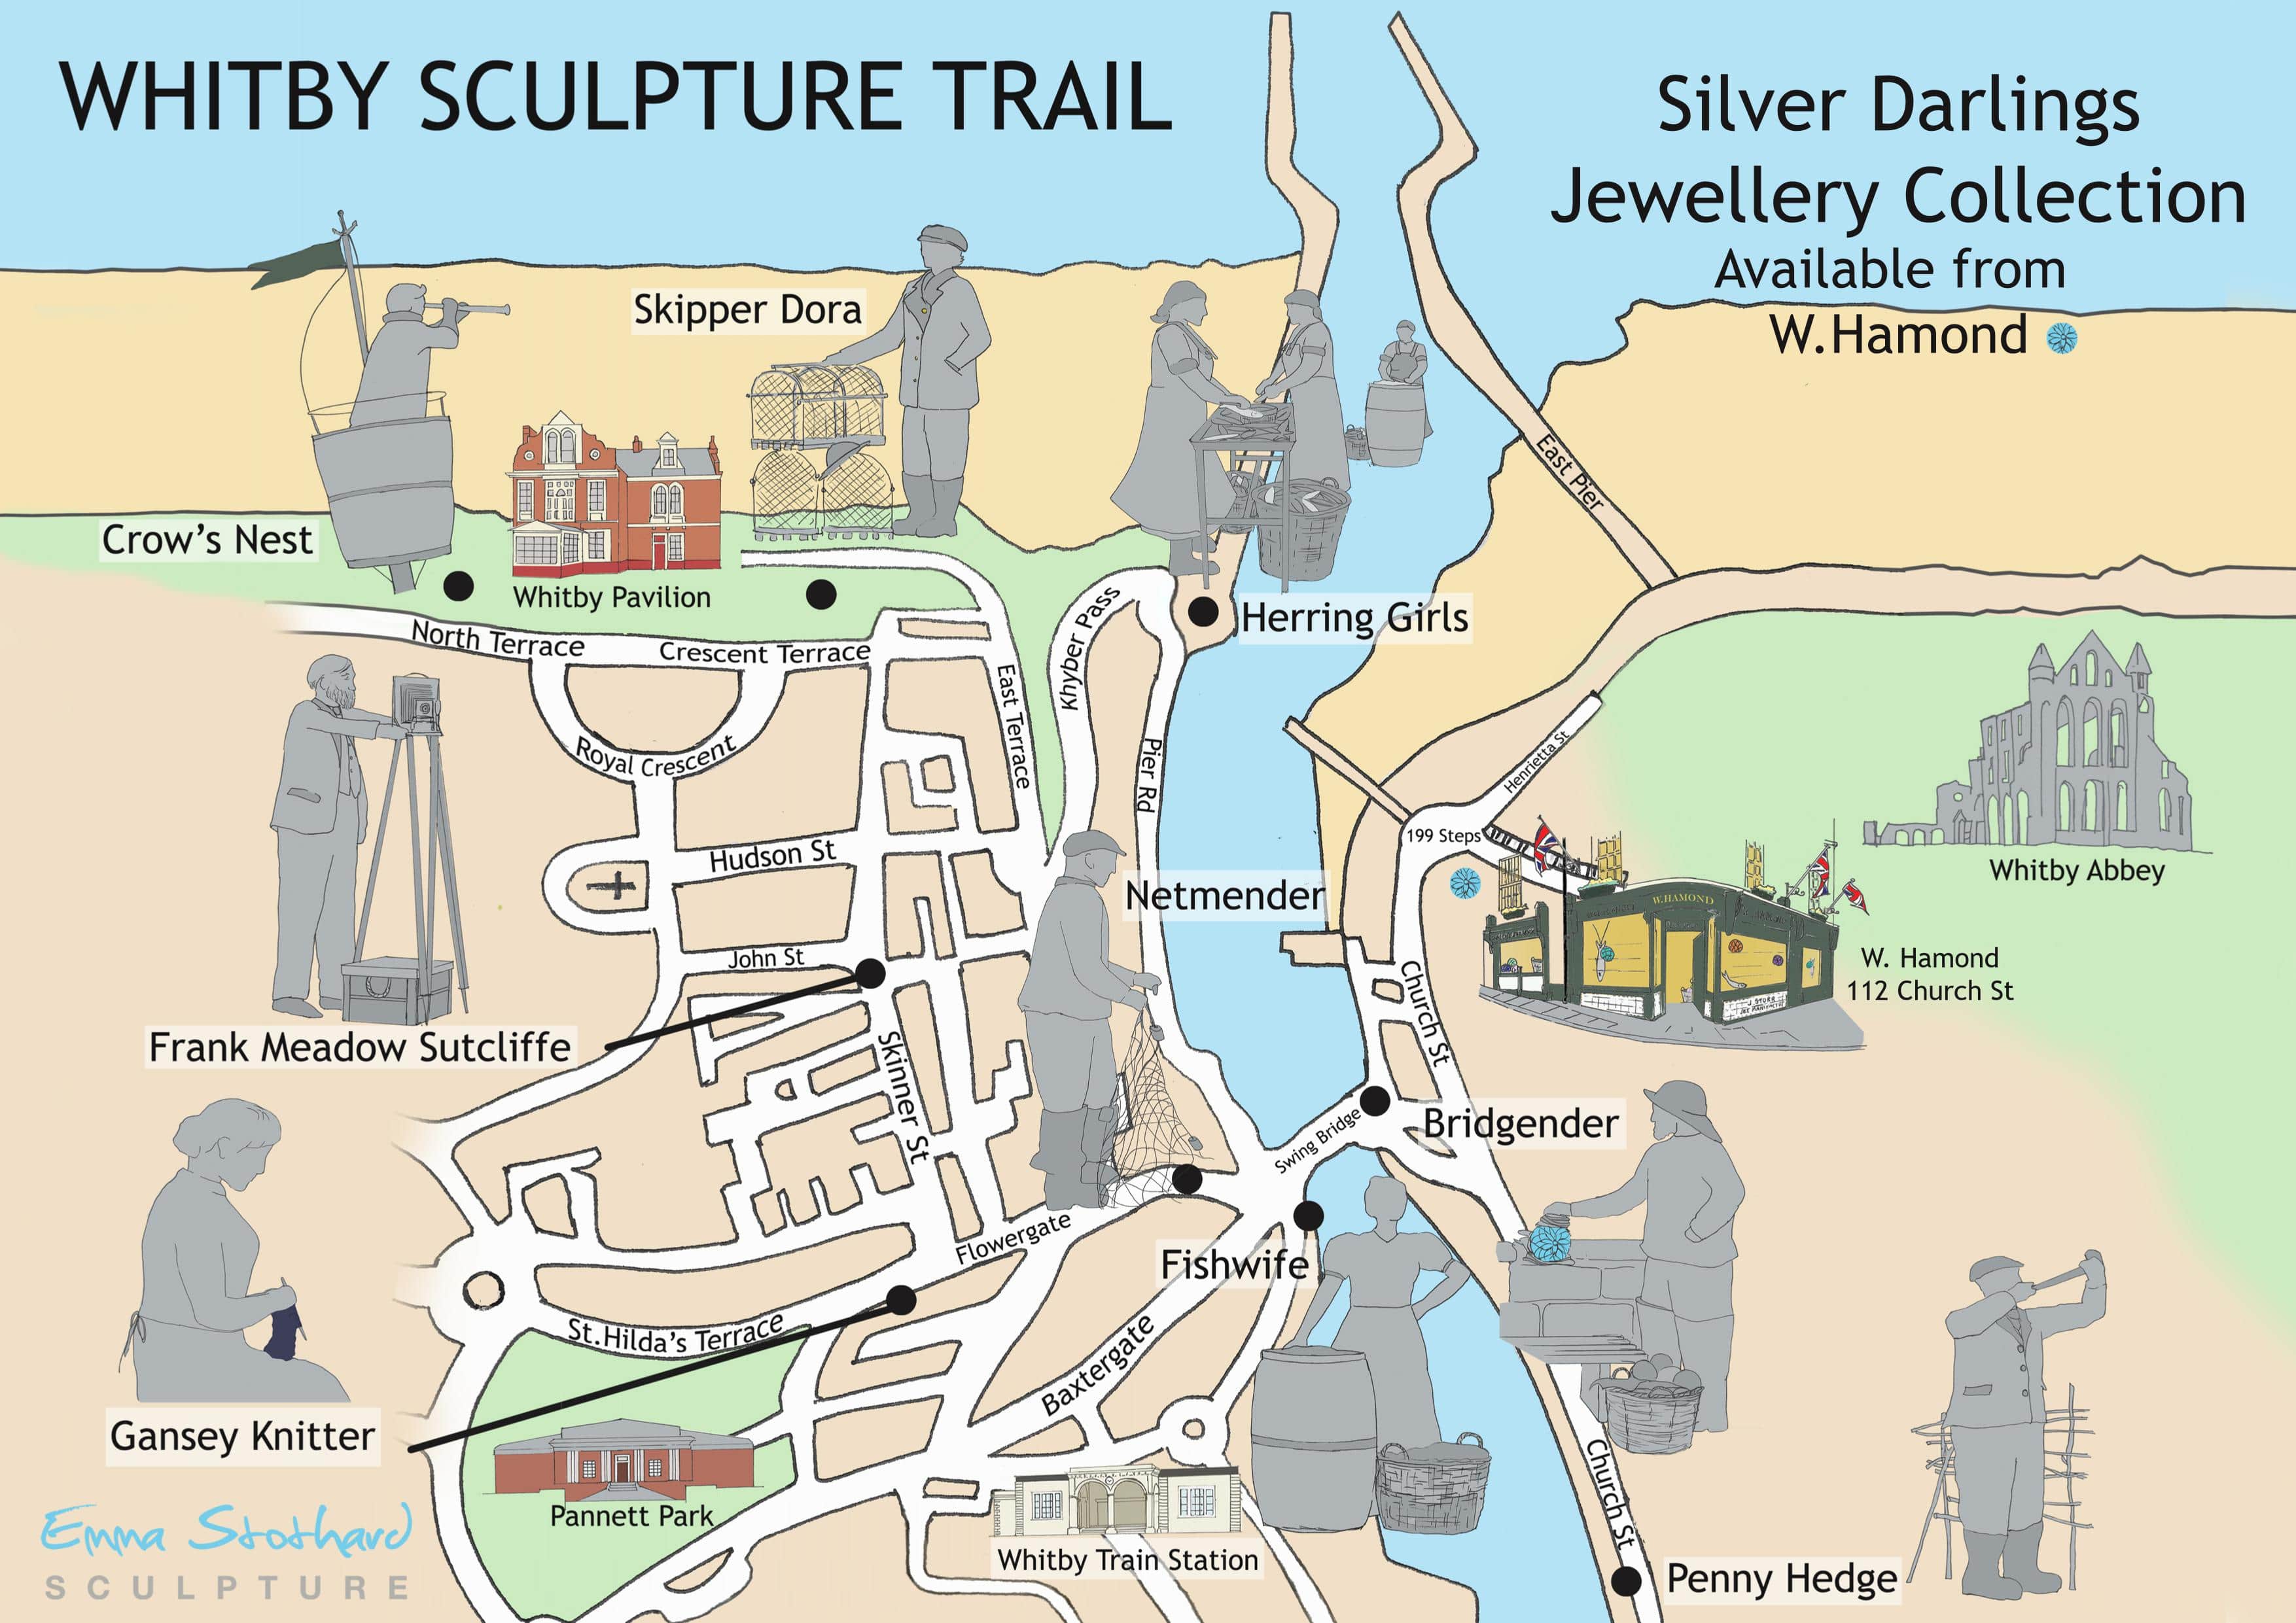 The Whitby Sculpture Trail